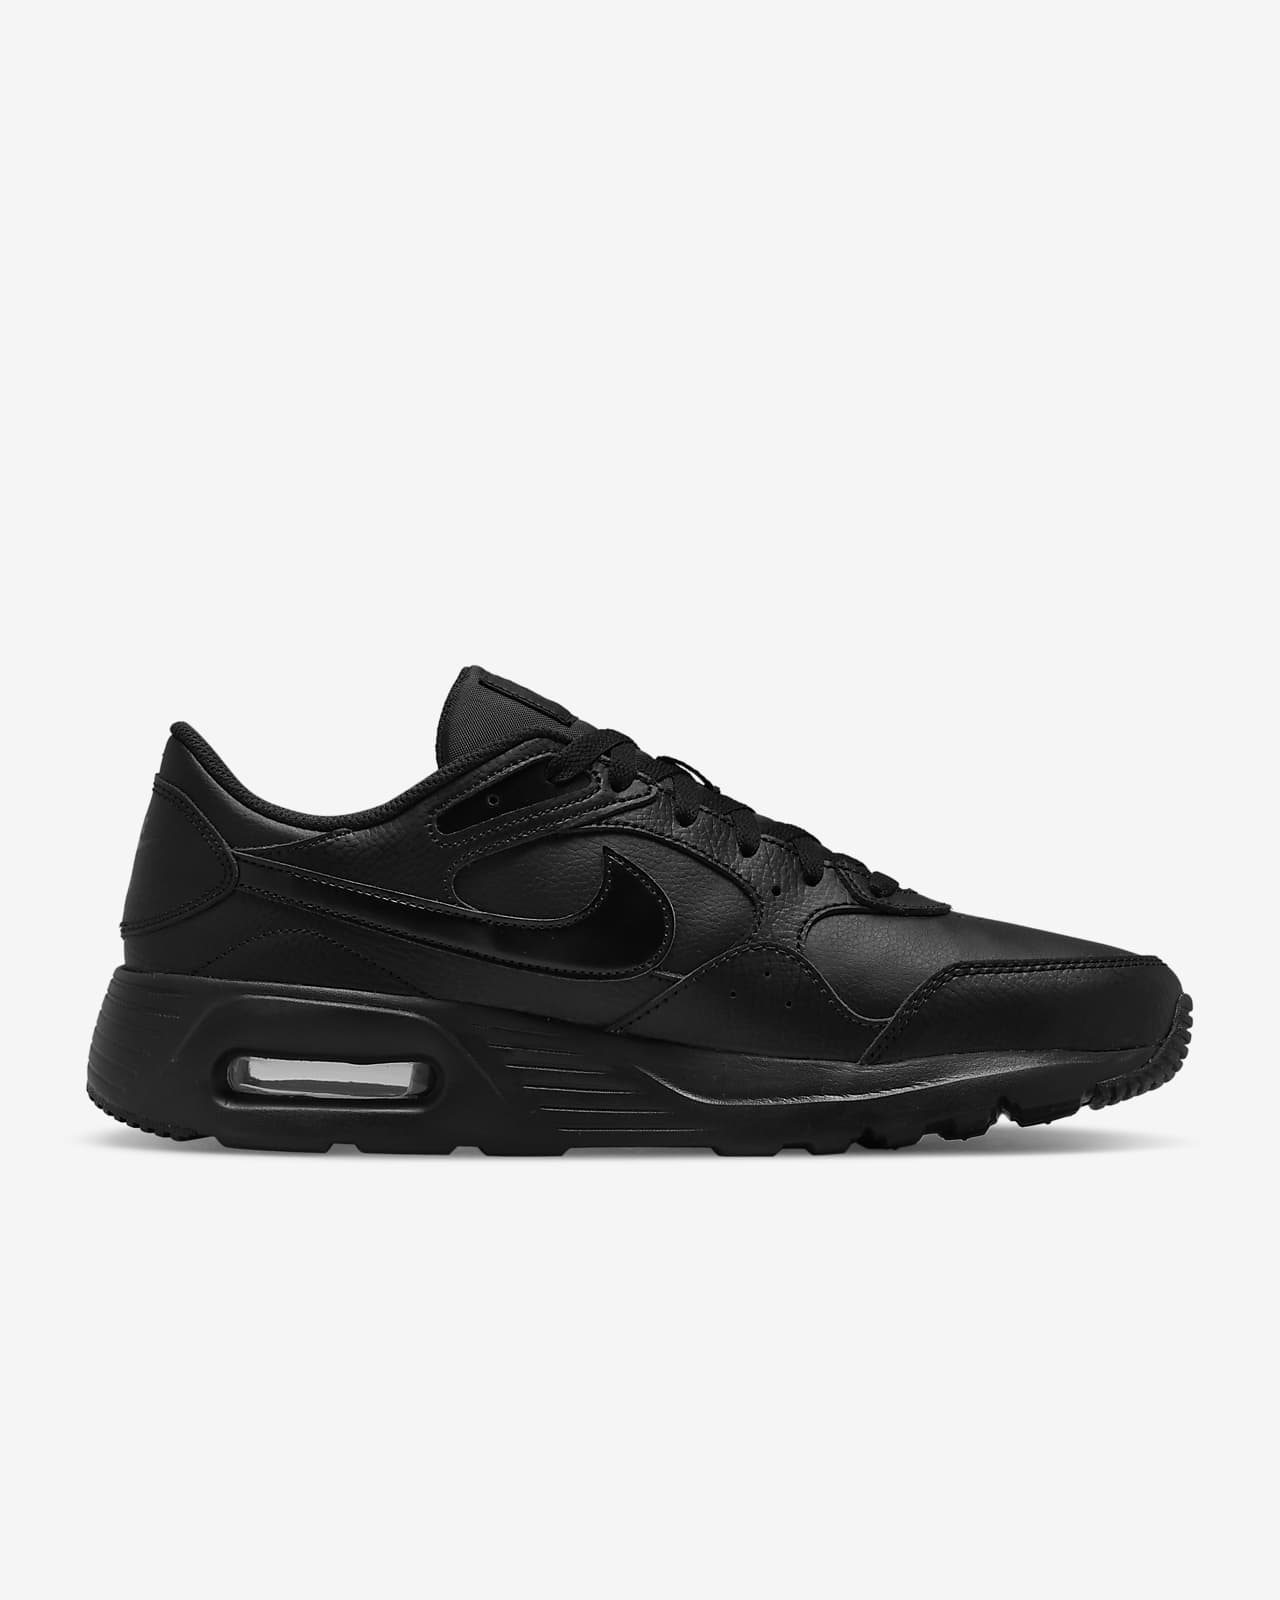 density Specifically embarrassed Nike Air Max SC Leather Men's Shoes. Nike.com